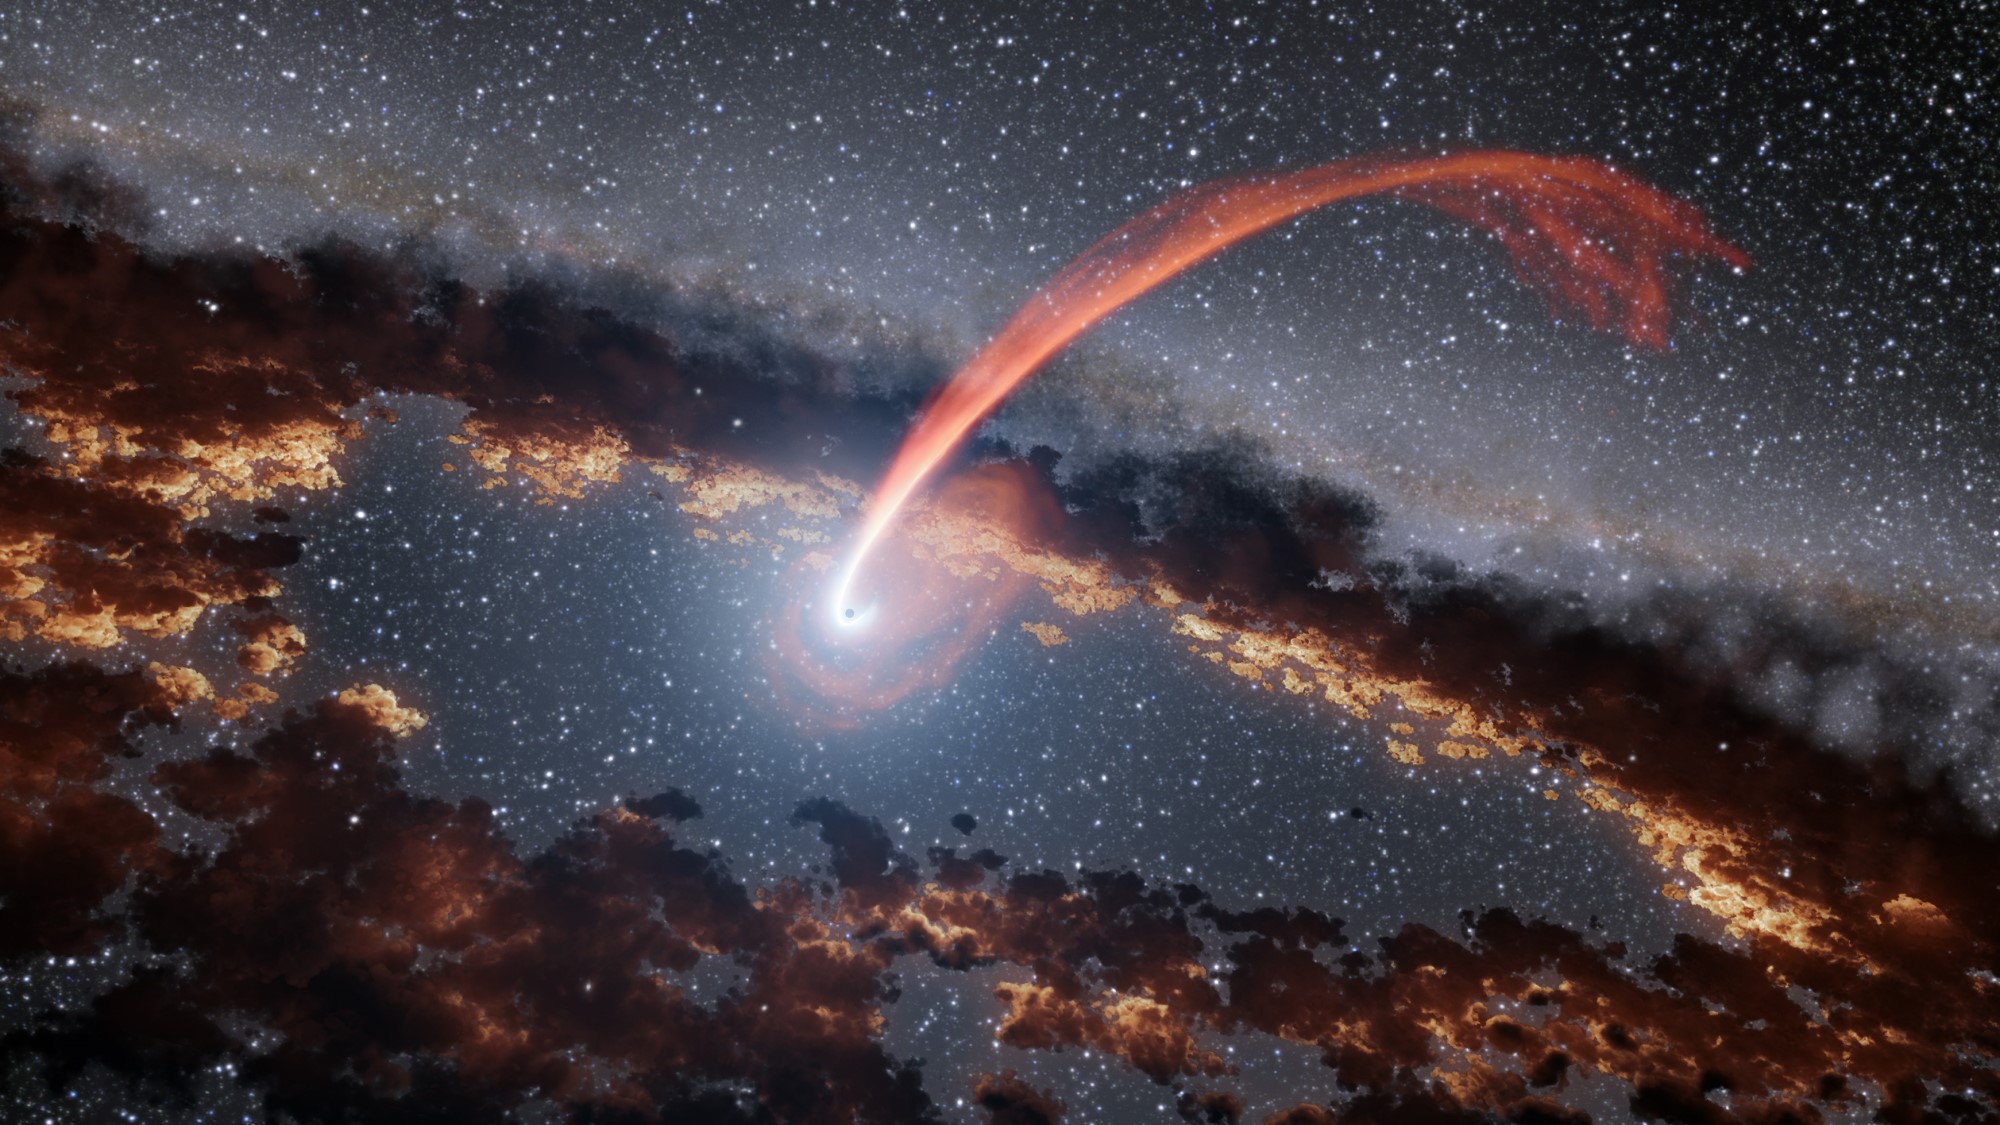 Artist's rendering of a supermassive black hole consuming material from a star.